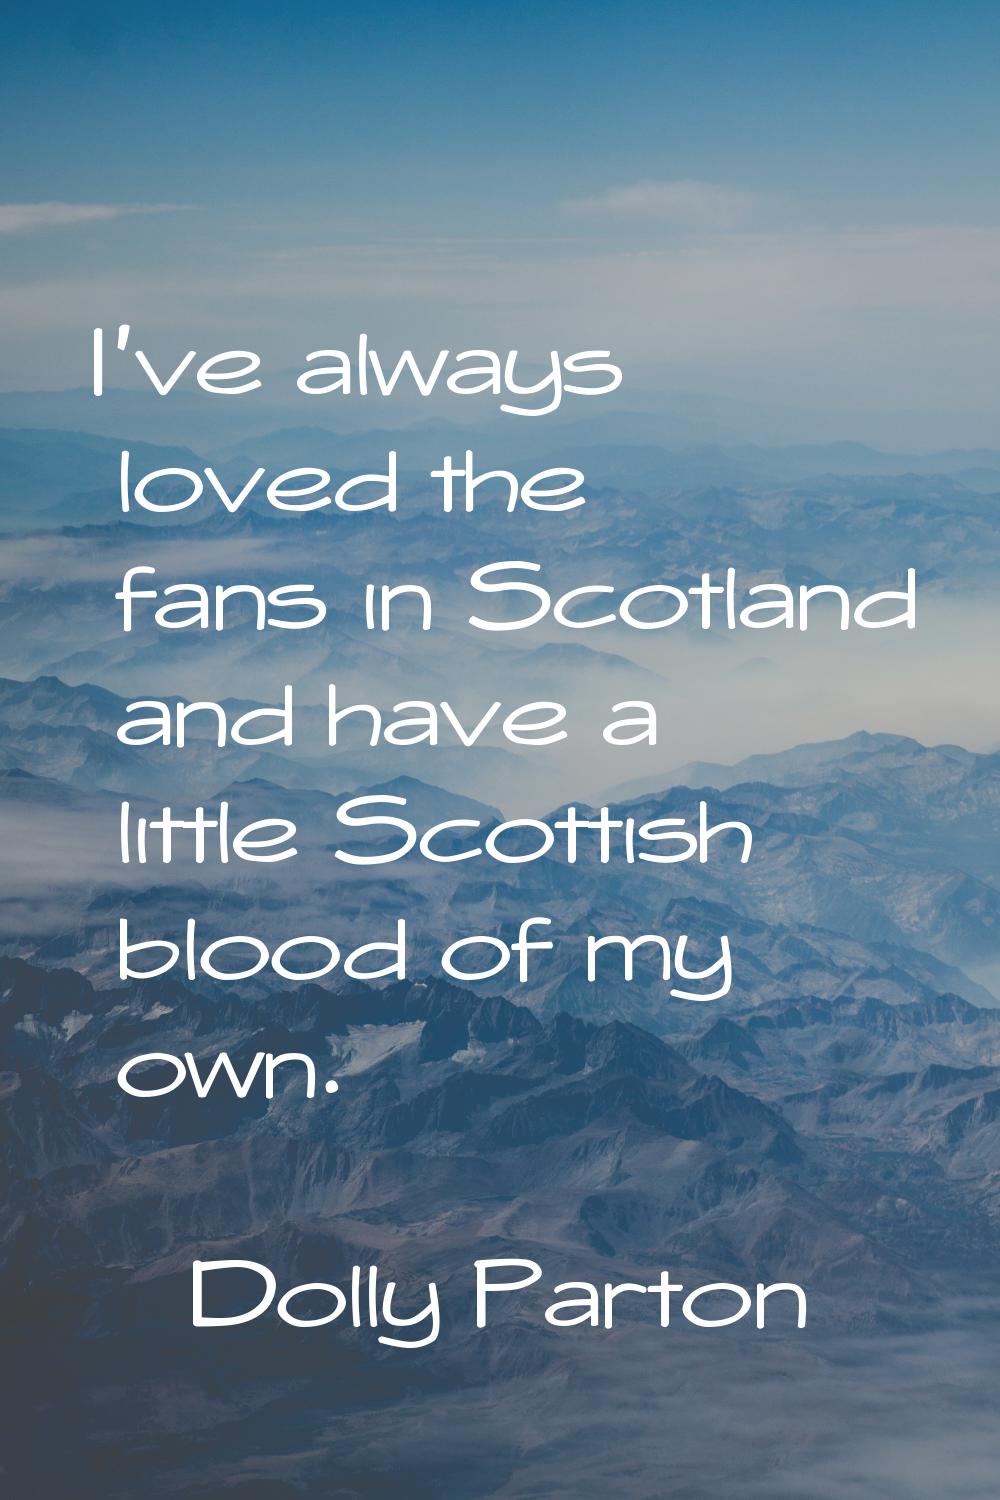 I've always loved the fans in Scotland and have a little Scottish blood of my own.